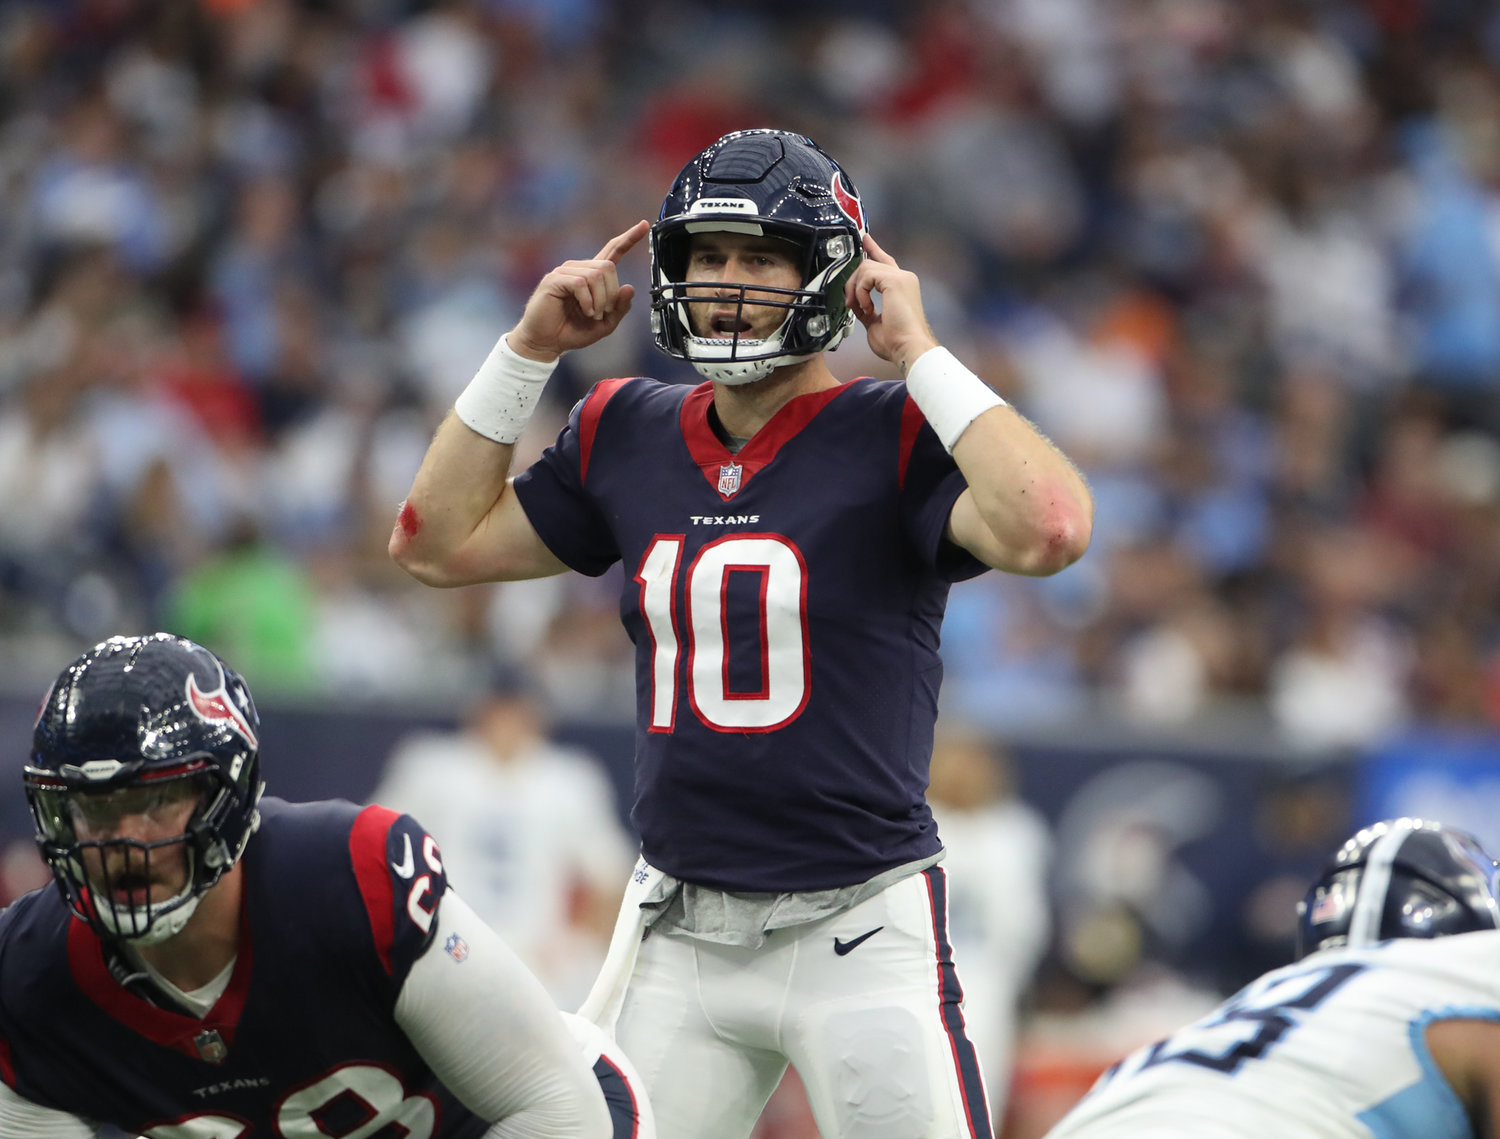 Houston Texans quarterback Davis Mills (10) during an NFL game between the Texans and the Titans on Jan. 9, 2022 in Houston, Texas. The Titans won, 28-25.